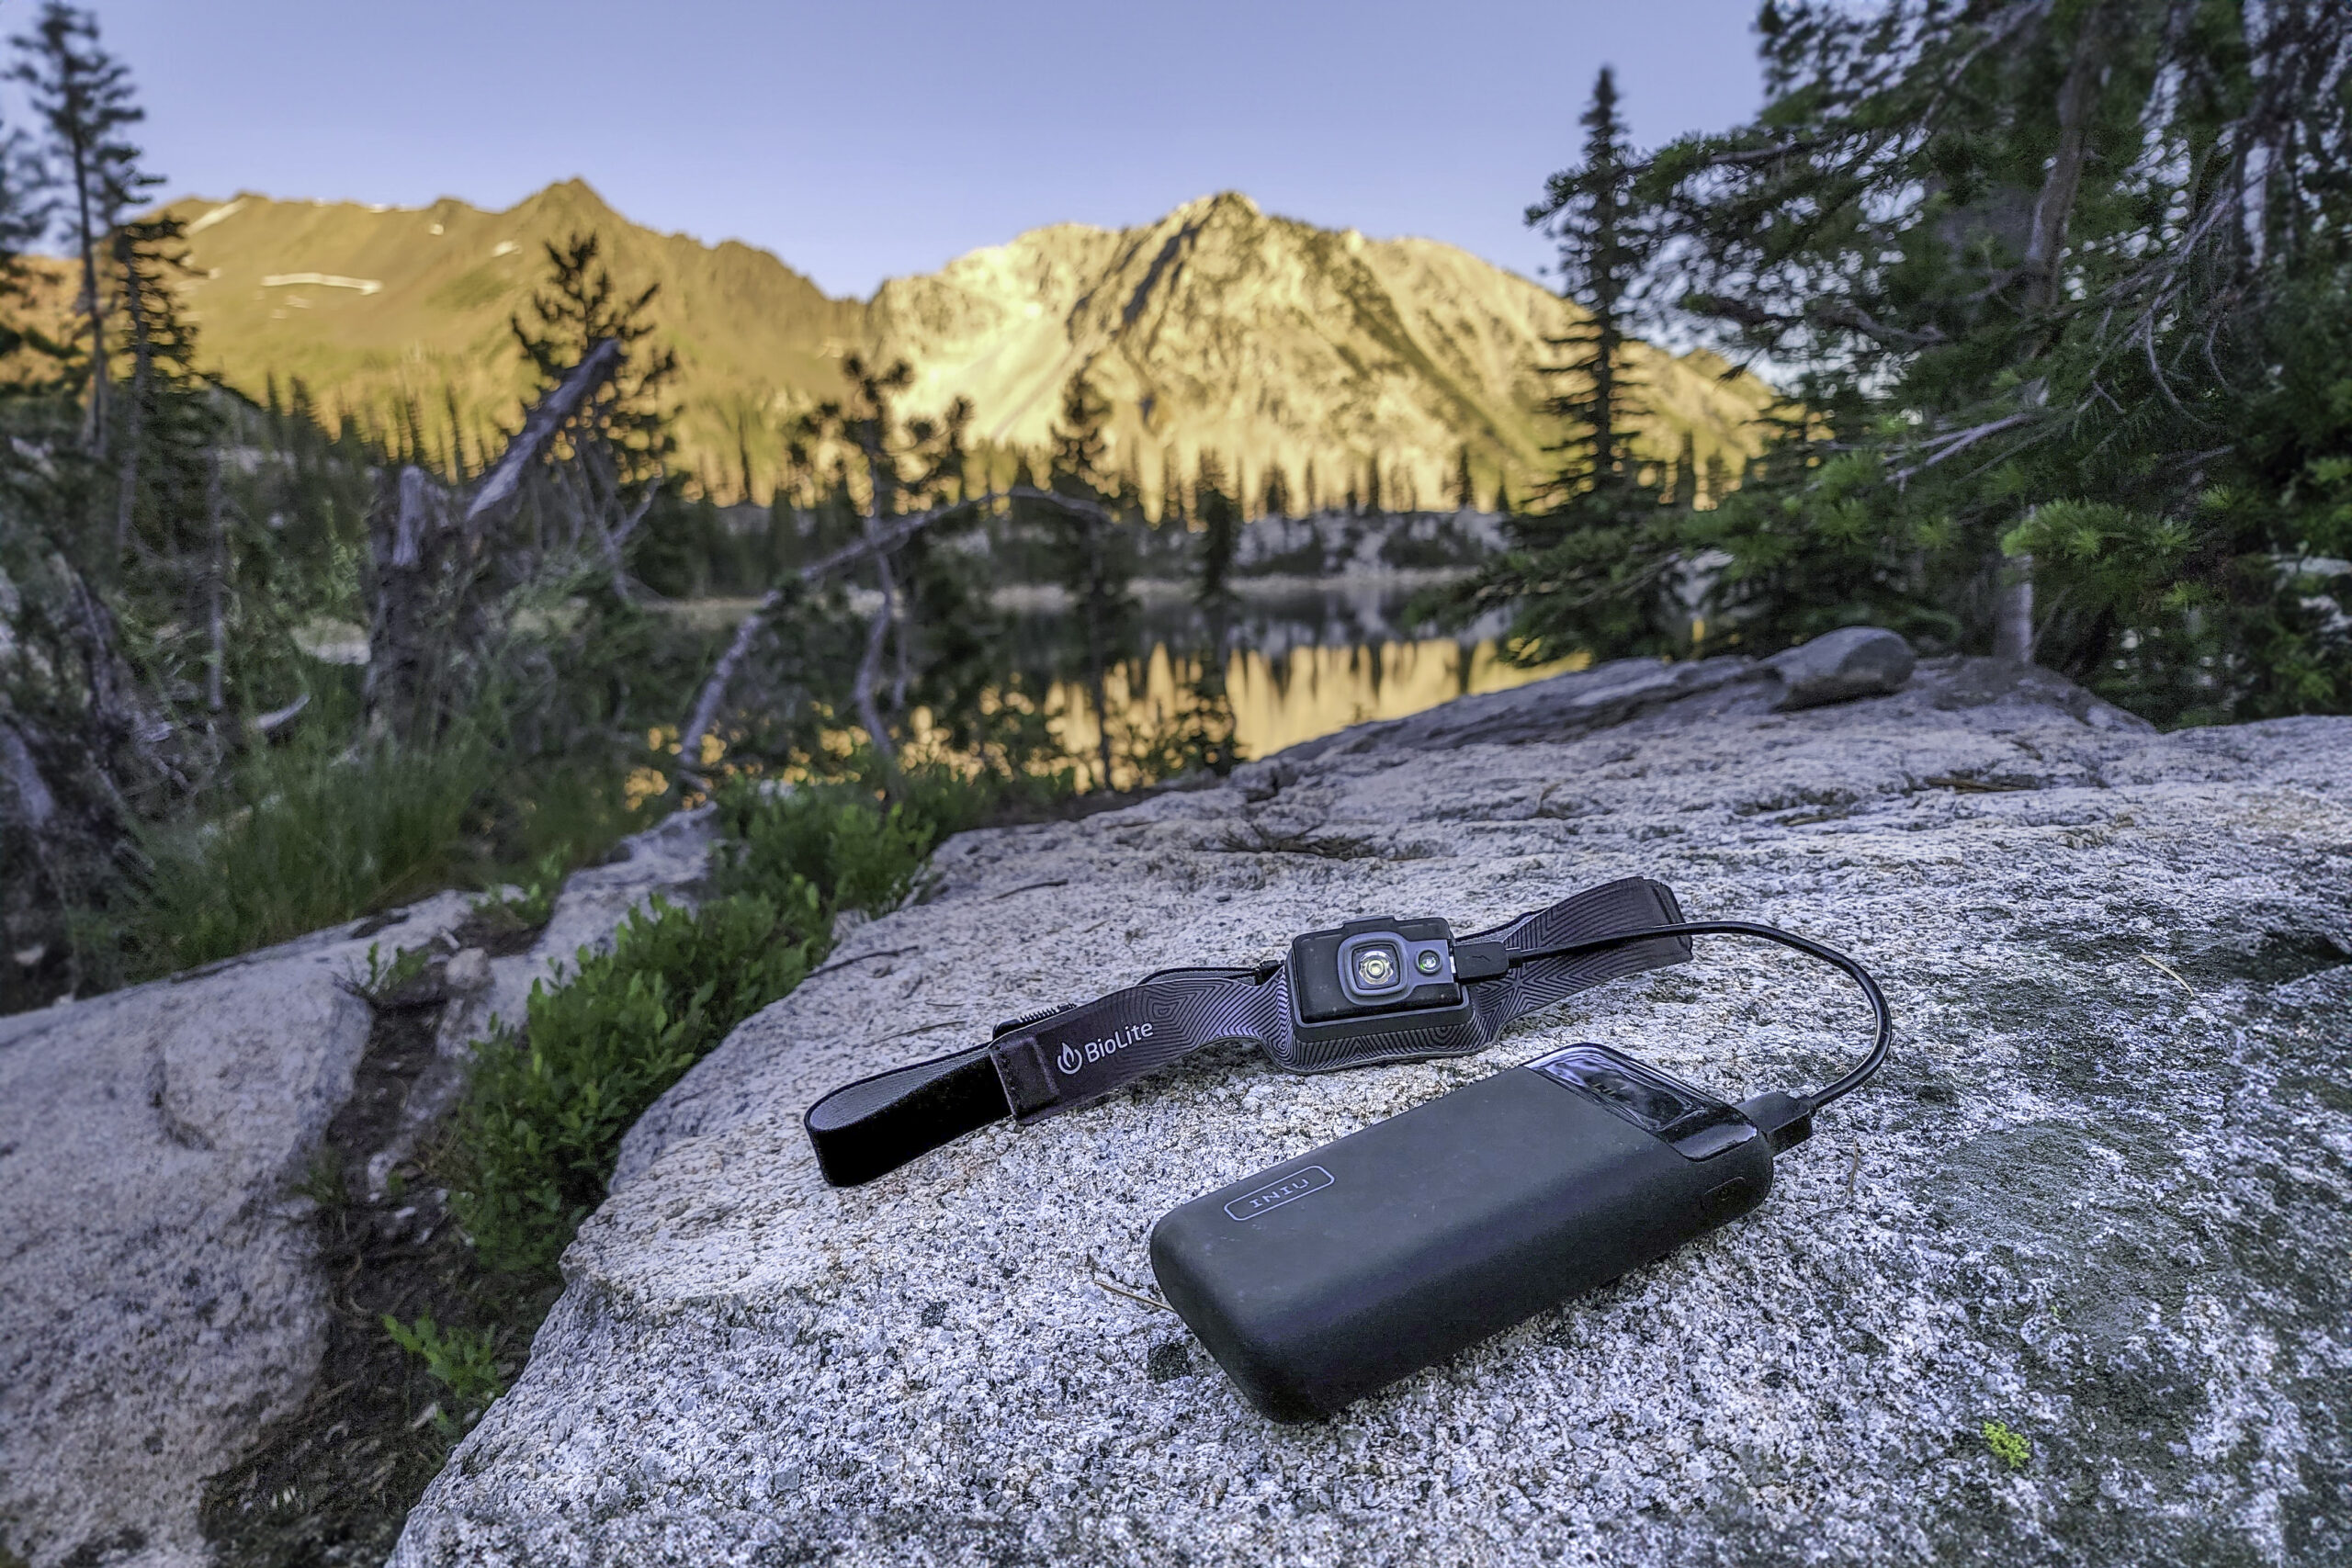 The Iniu 20000 PD power bank sitting on a granite slab while charging a rechargeable Biolite headlamp with the Wallowa Mountains at sunset in the background